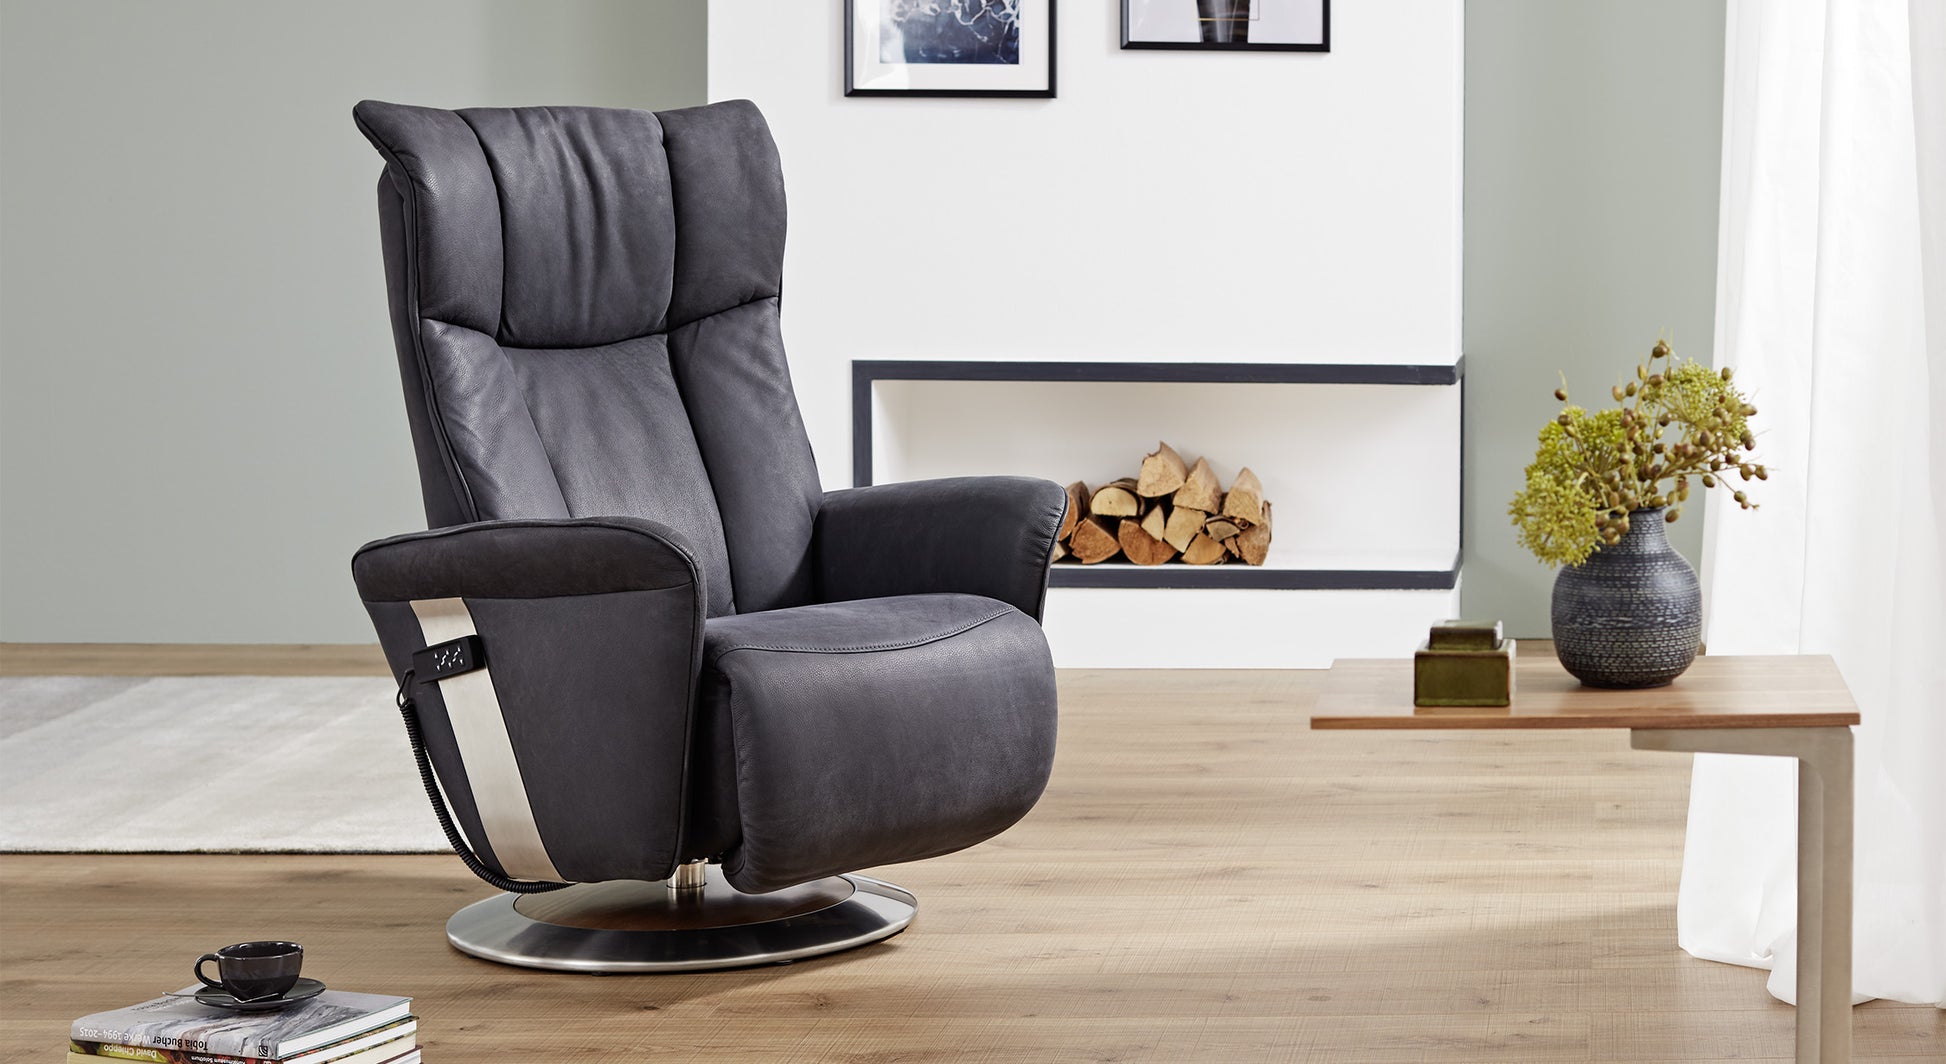 Fauteuil Relax 7927 +50 tissus & cuirs au choix